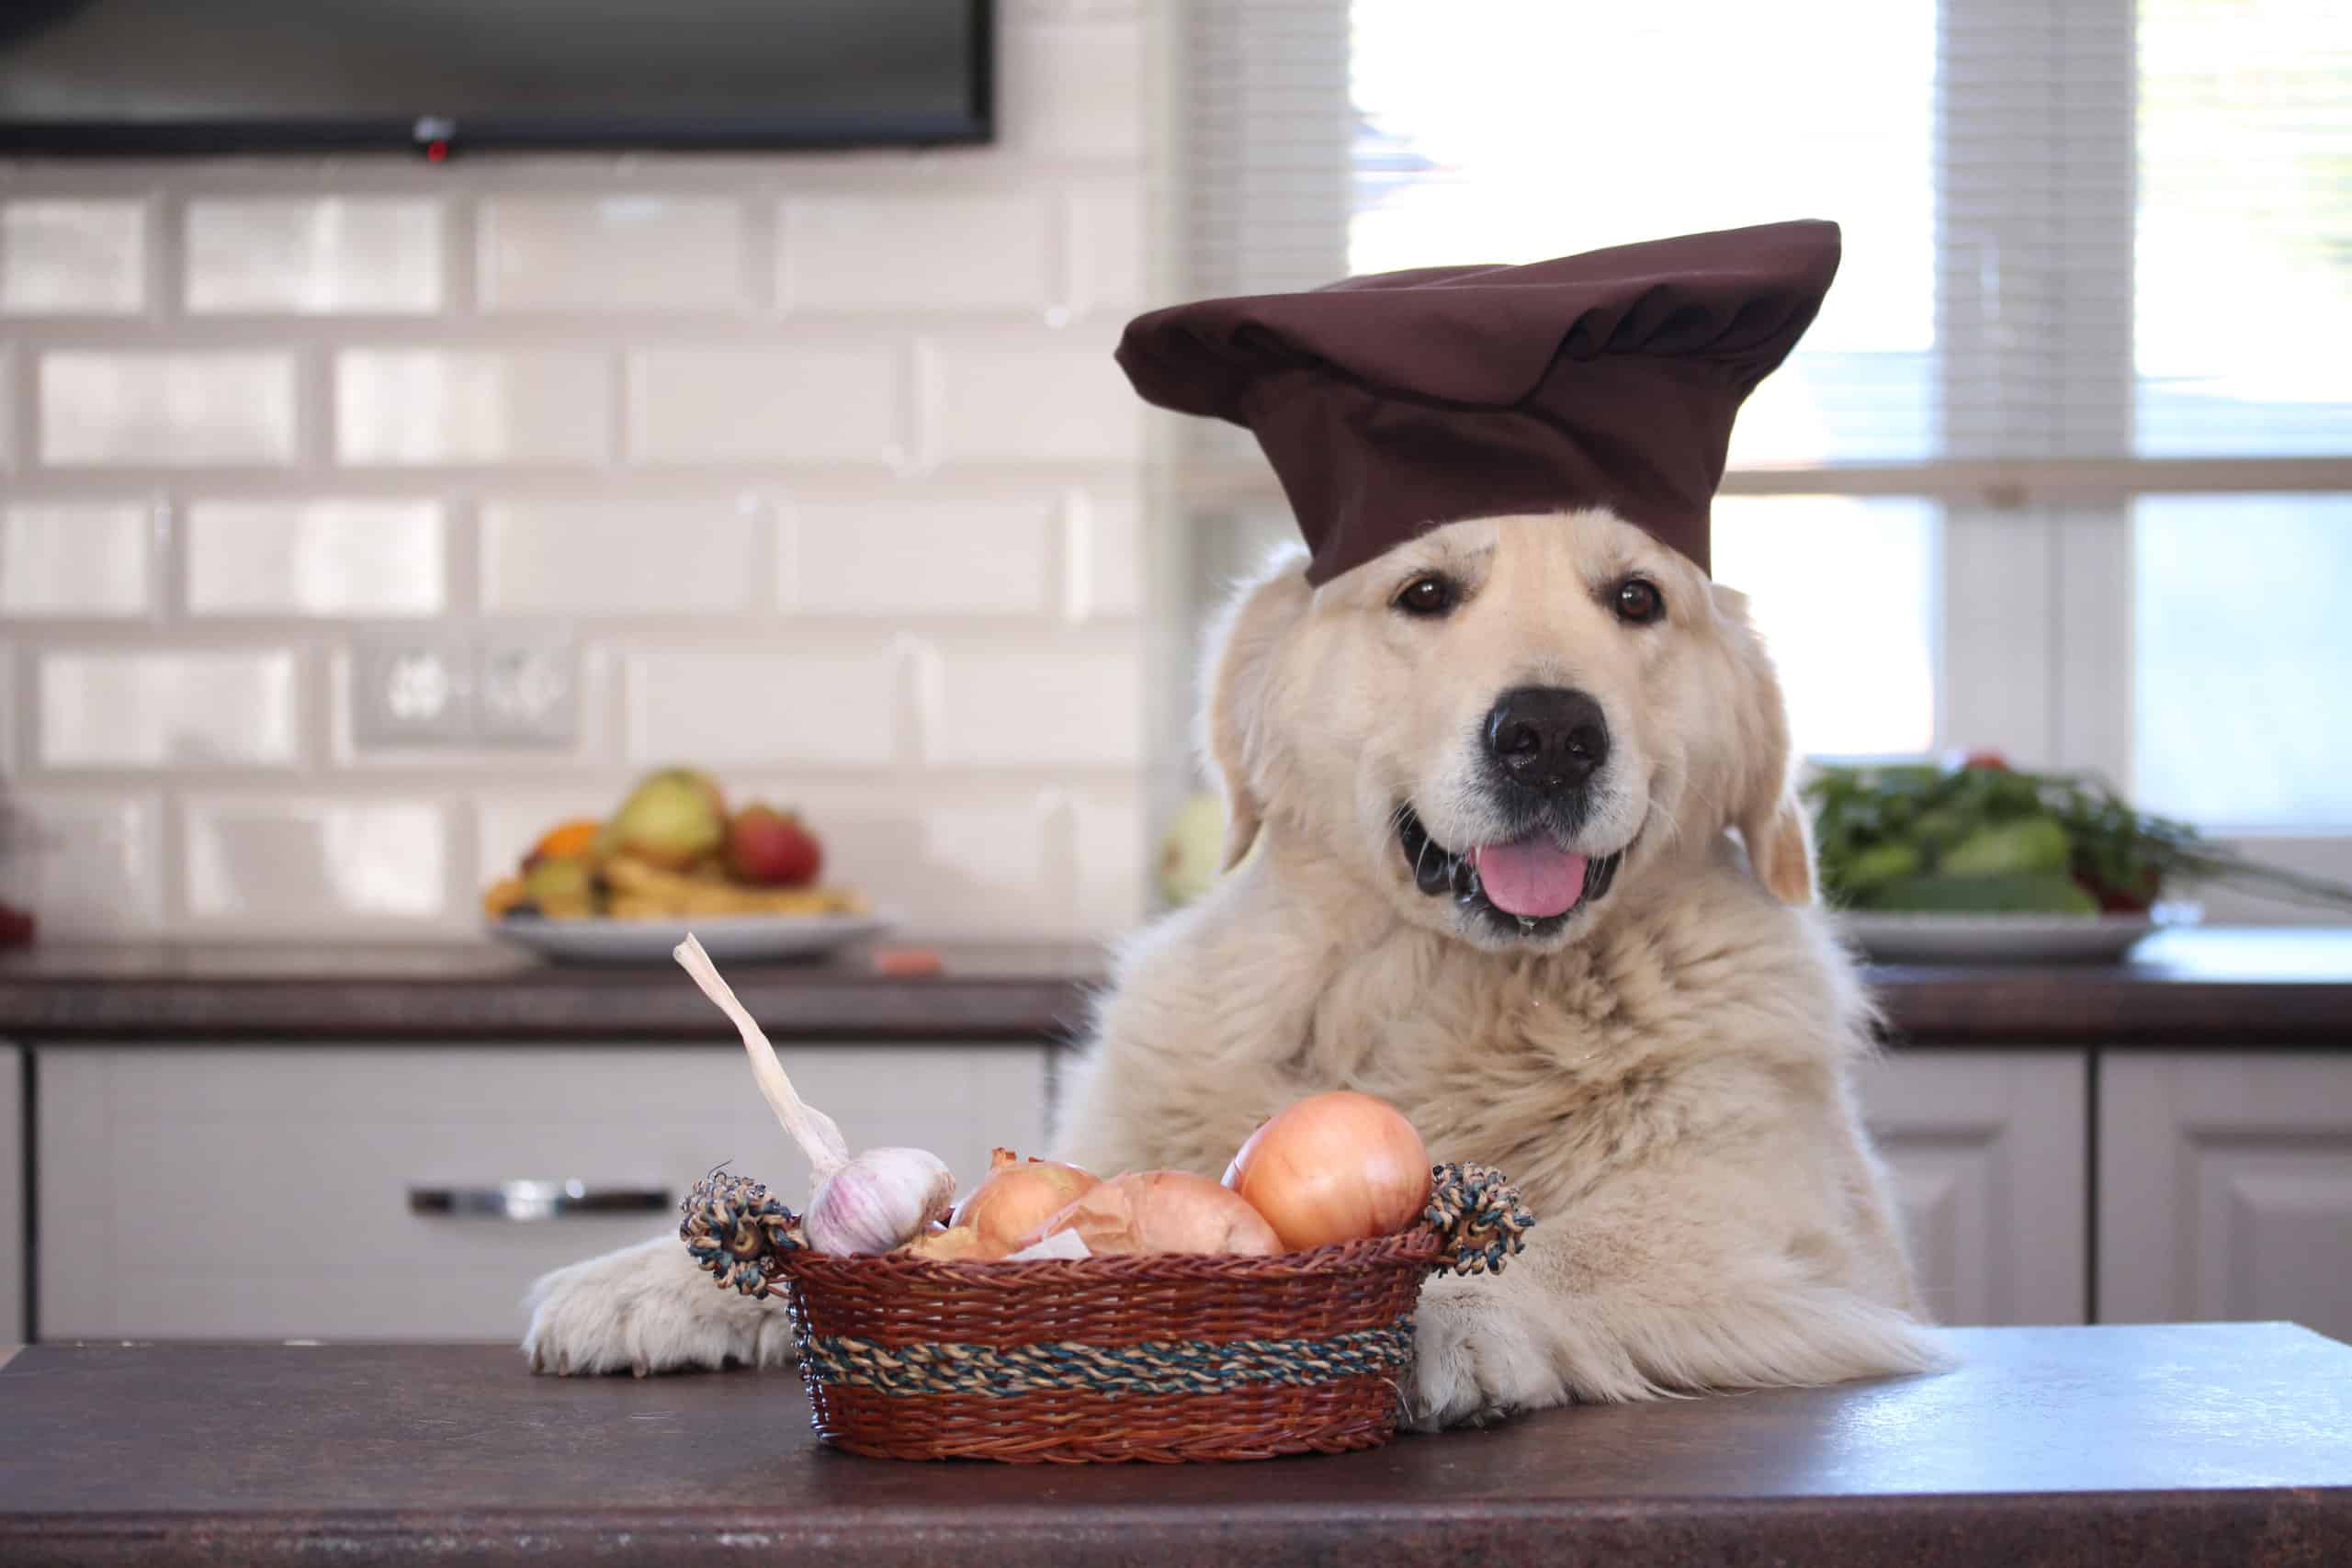 Dogs Eating Onions Is Dangerous! Here's Why - AZ Animals